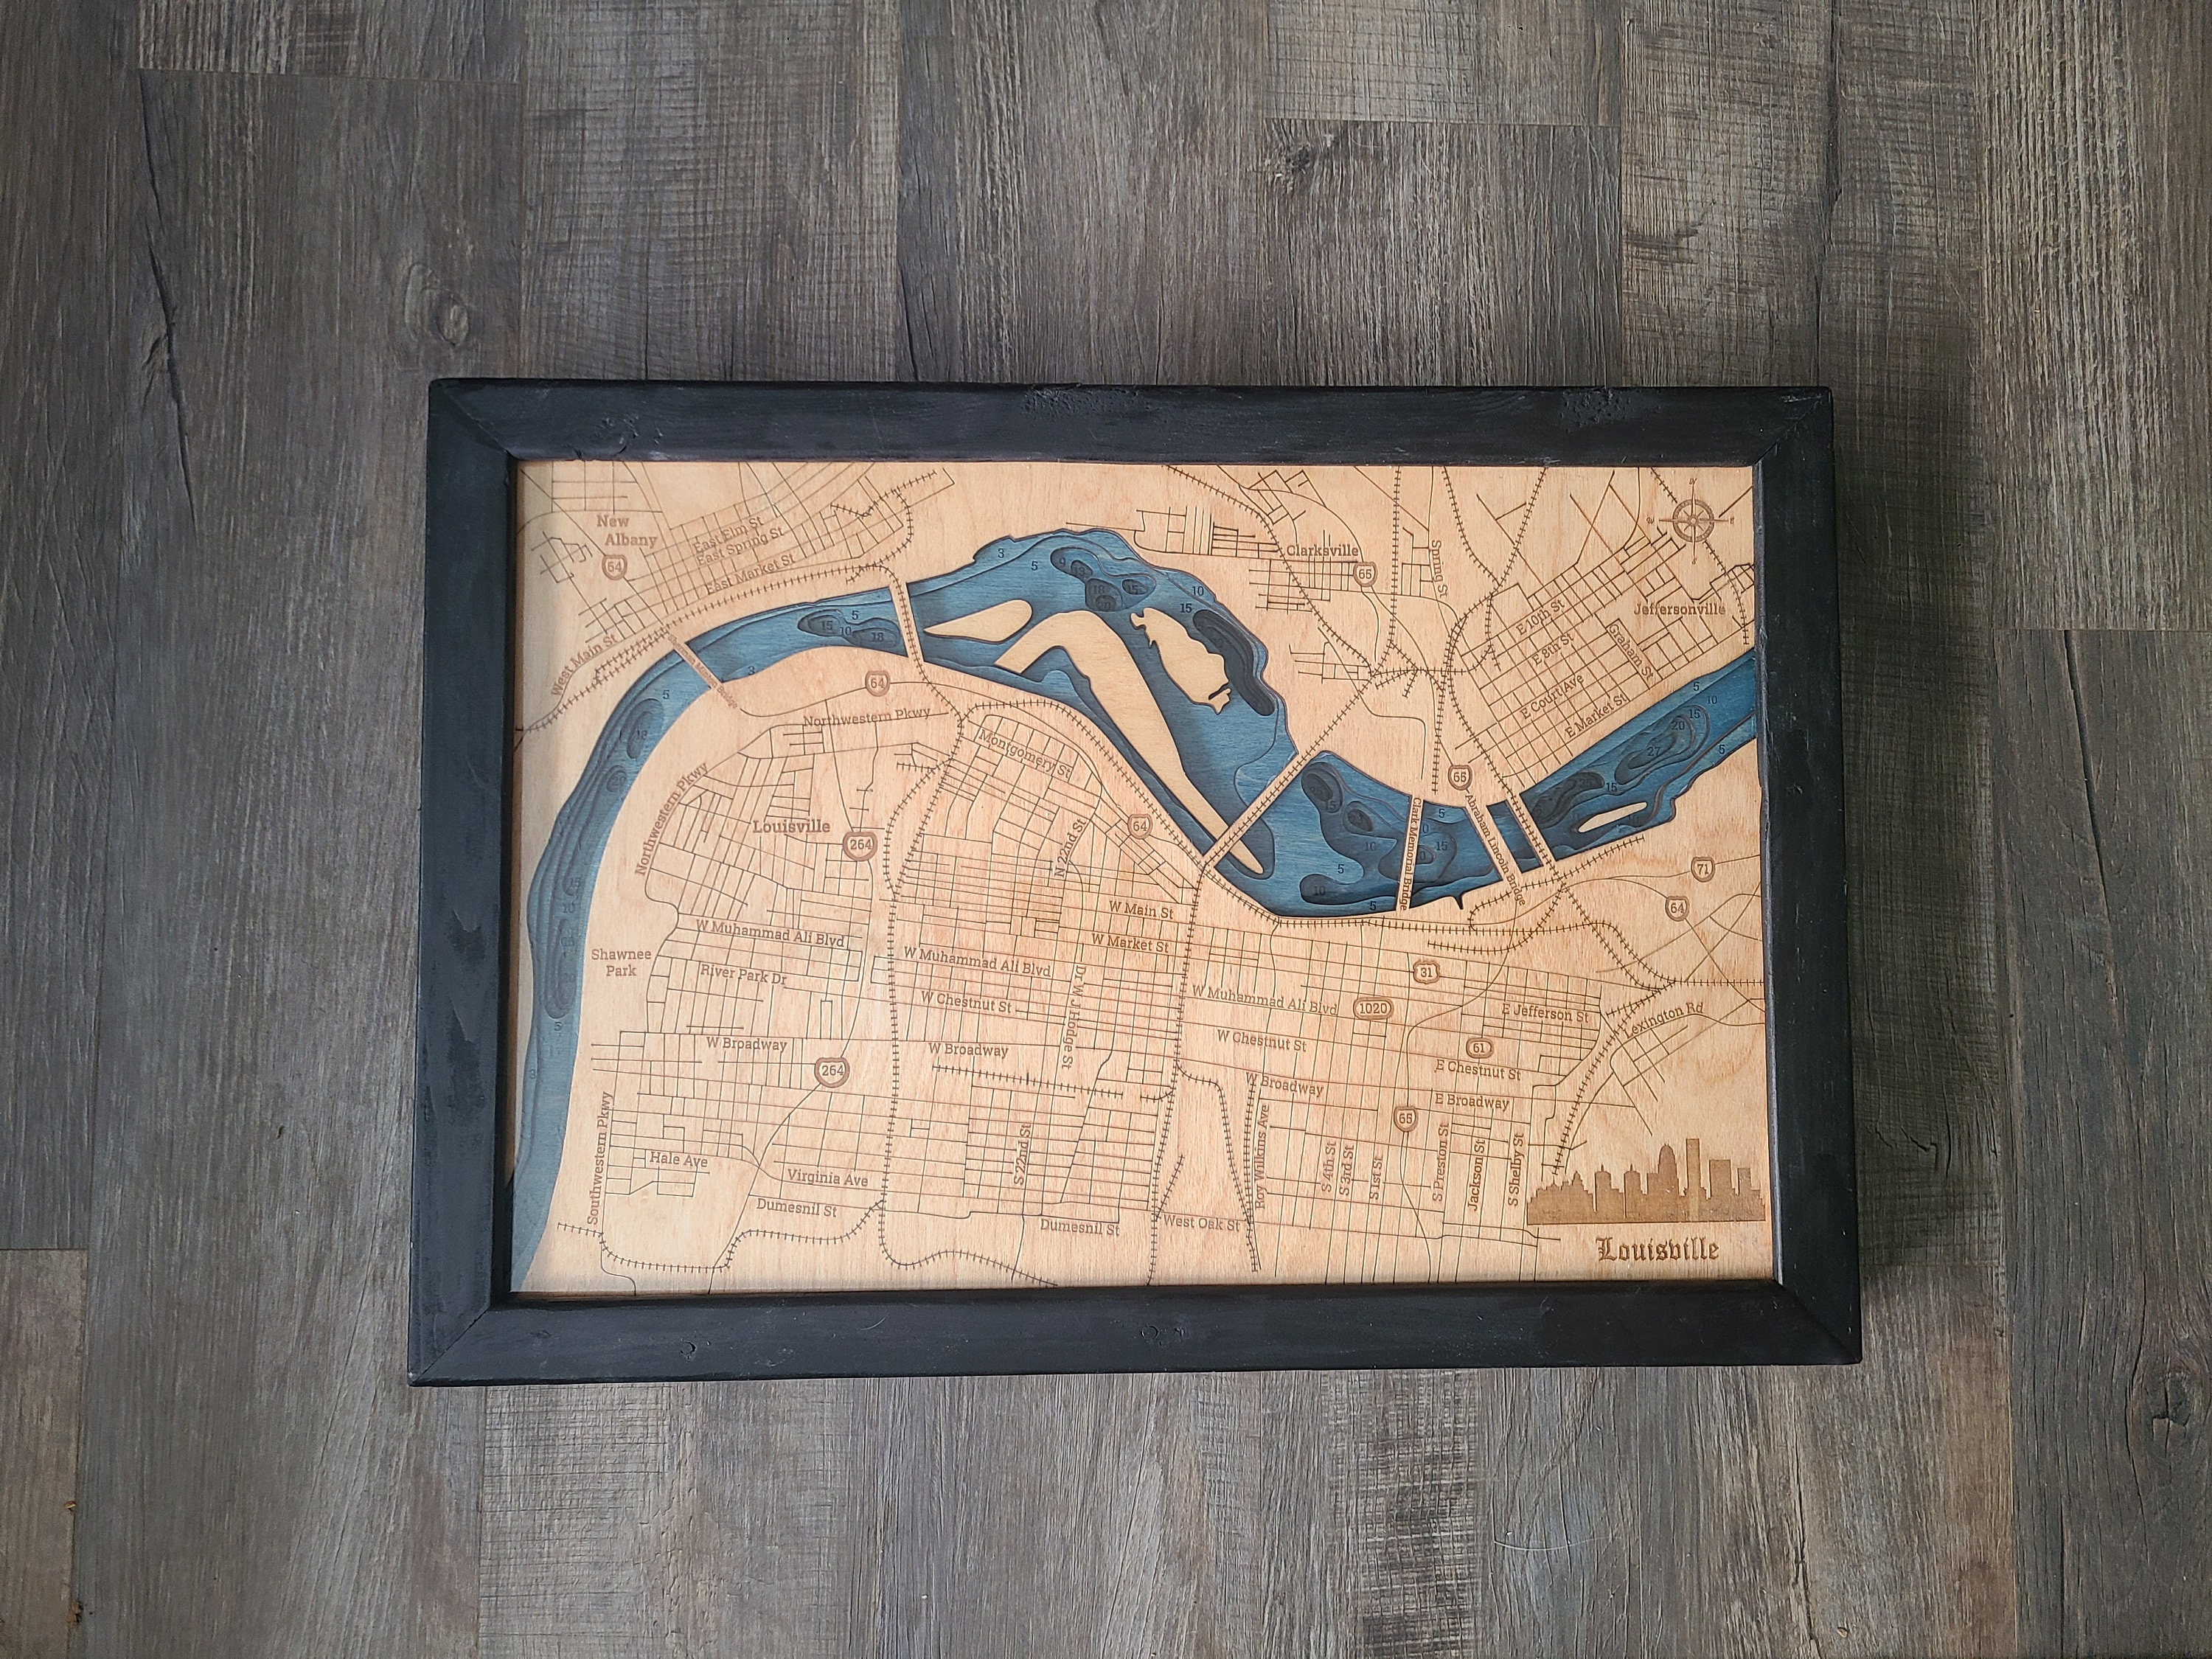 Louisville city map Framed Mini Art Print by Serenity by Alex